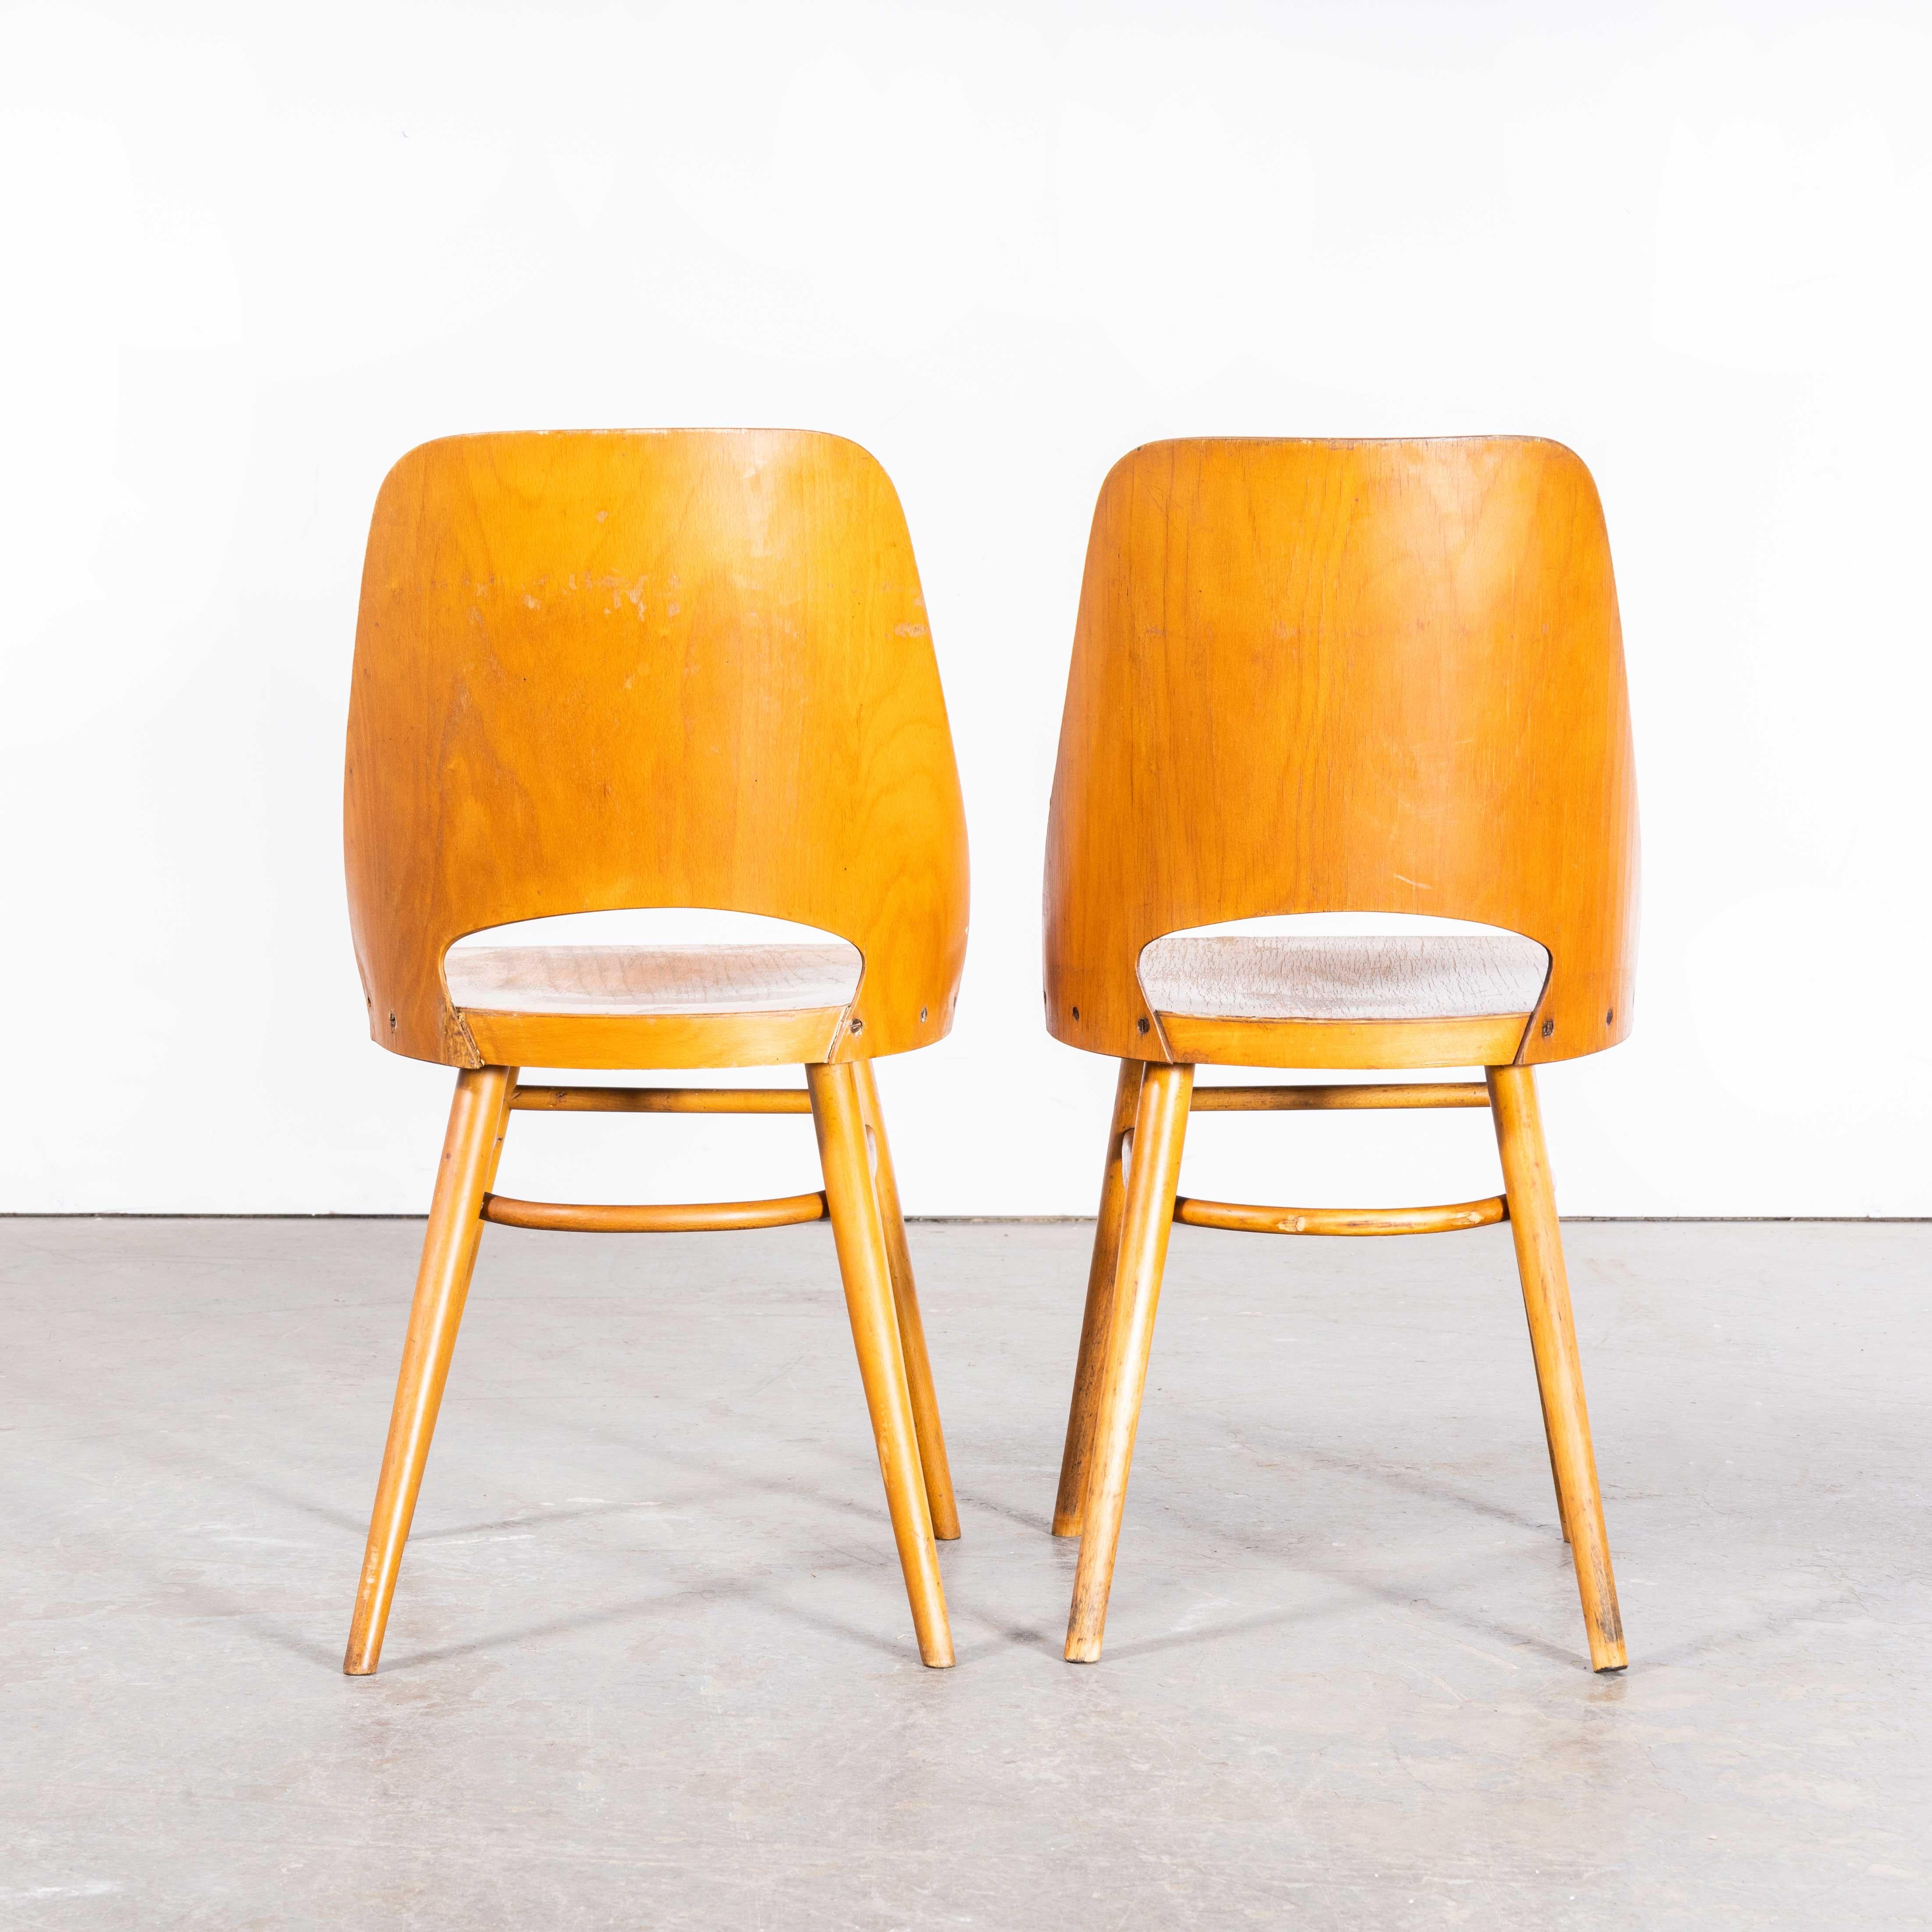 Mid-20th Century 1950's Honey Beech Dining Chairs By Radomir Hoffman For Ton - Pair For Sale